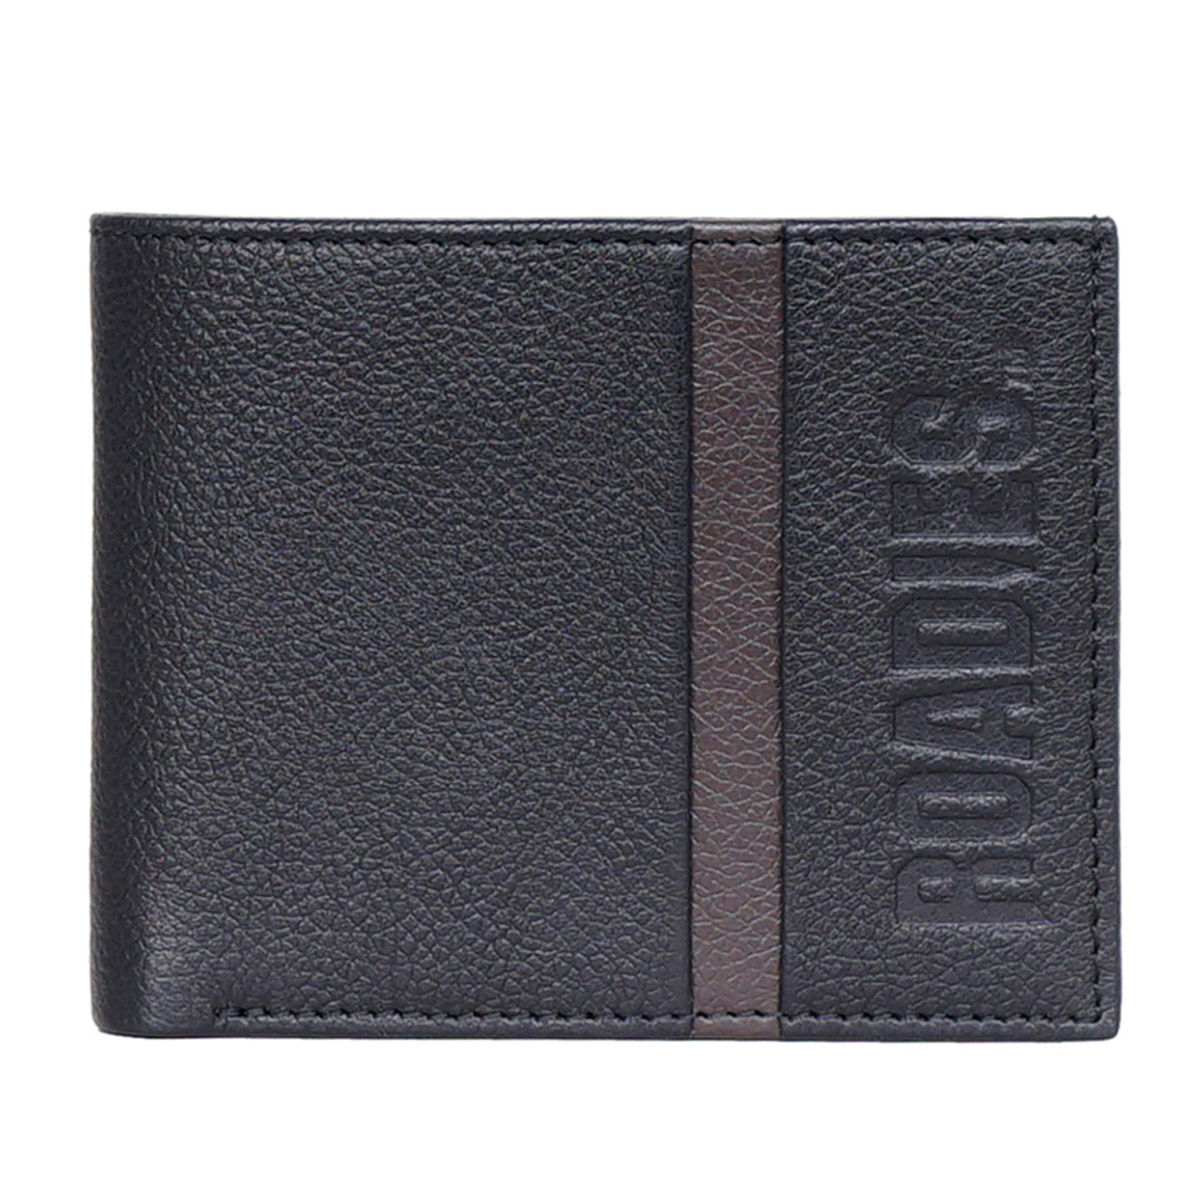 Justanned Bifold Mens Leather Wallet